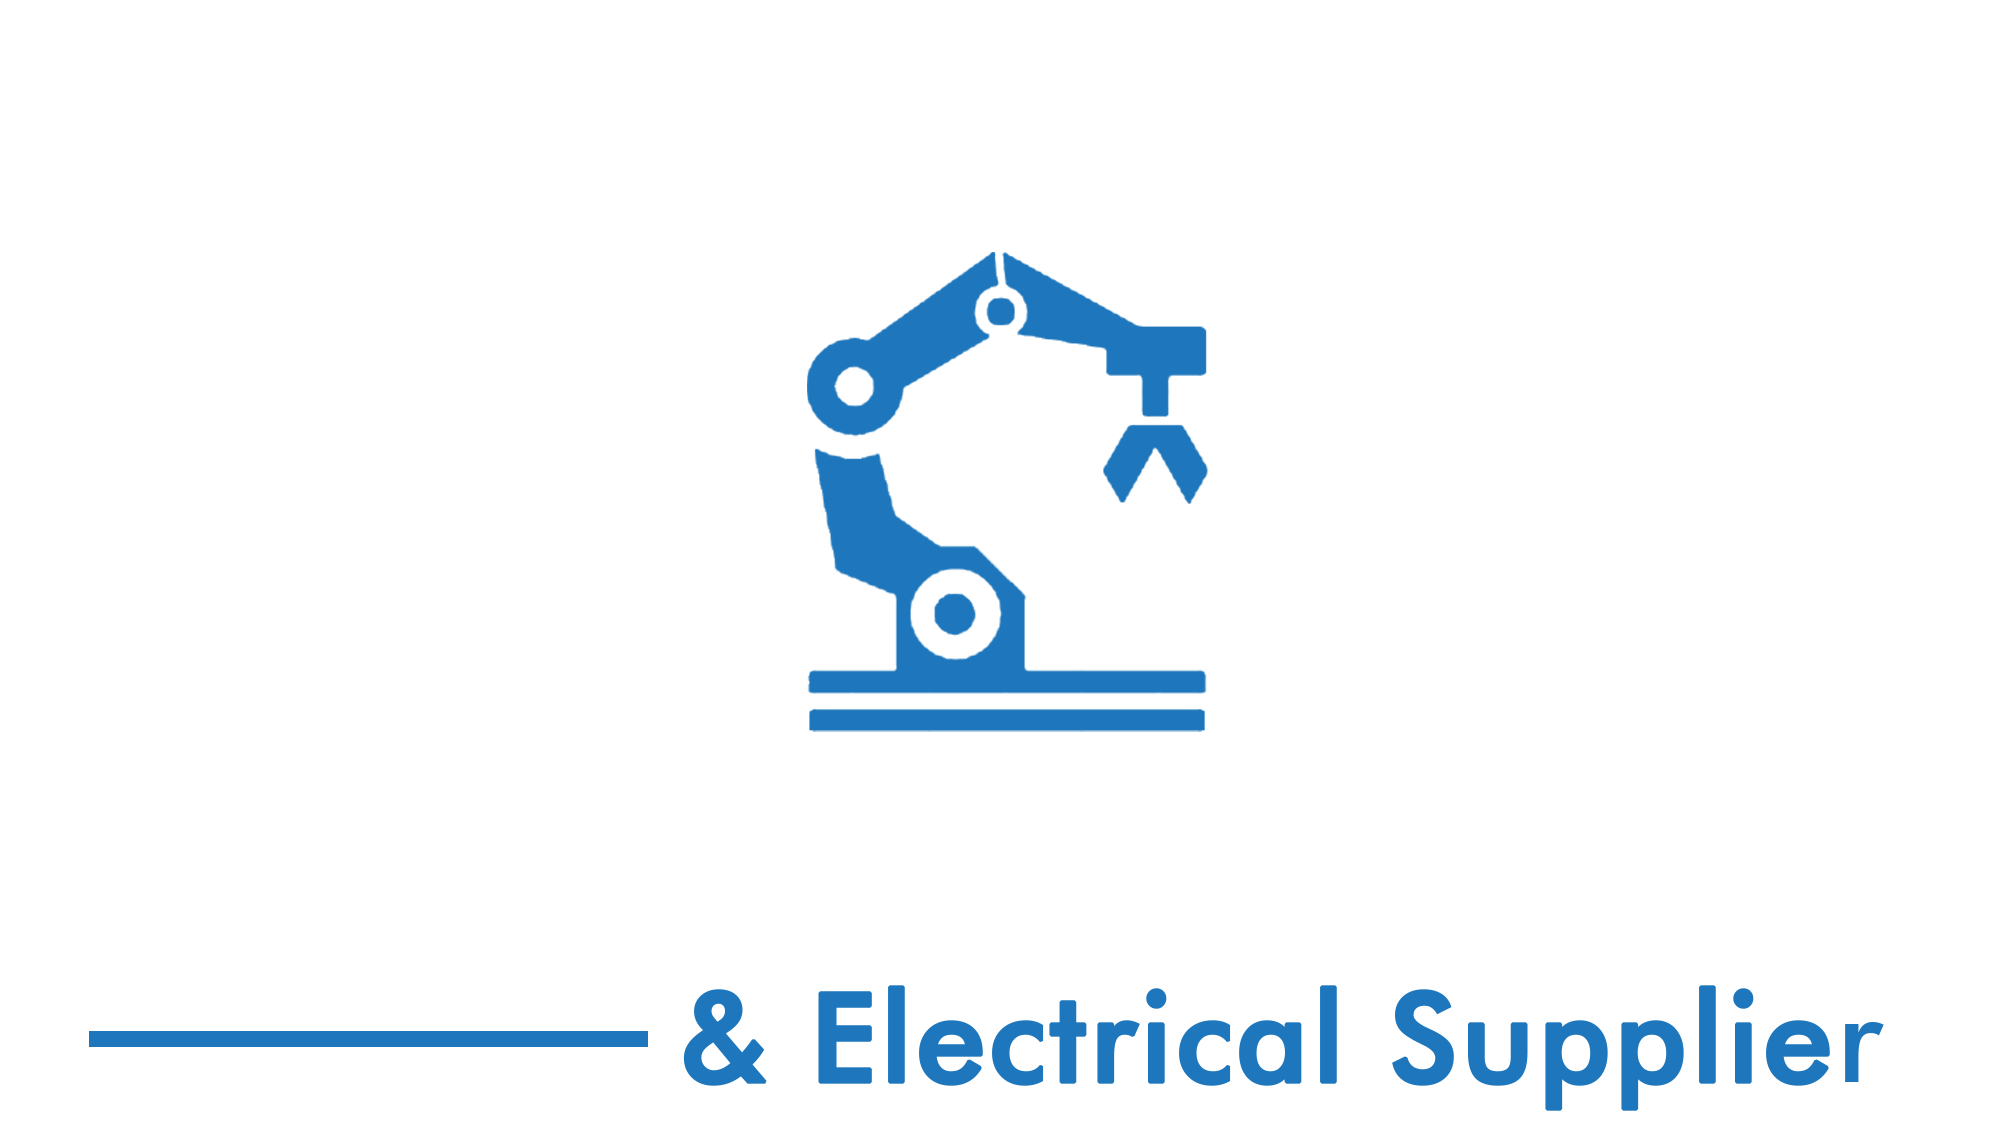 Om Automation